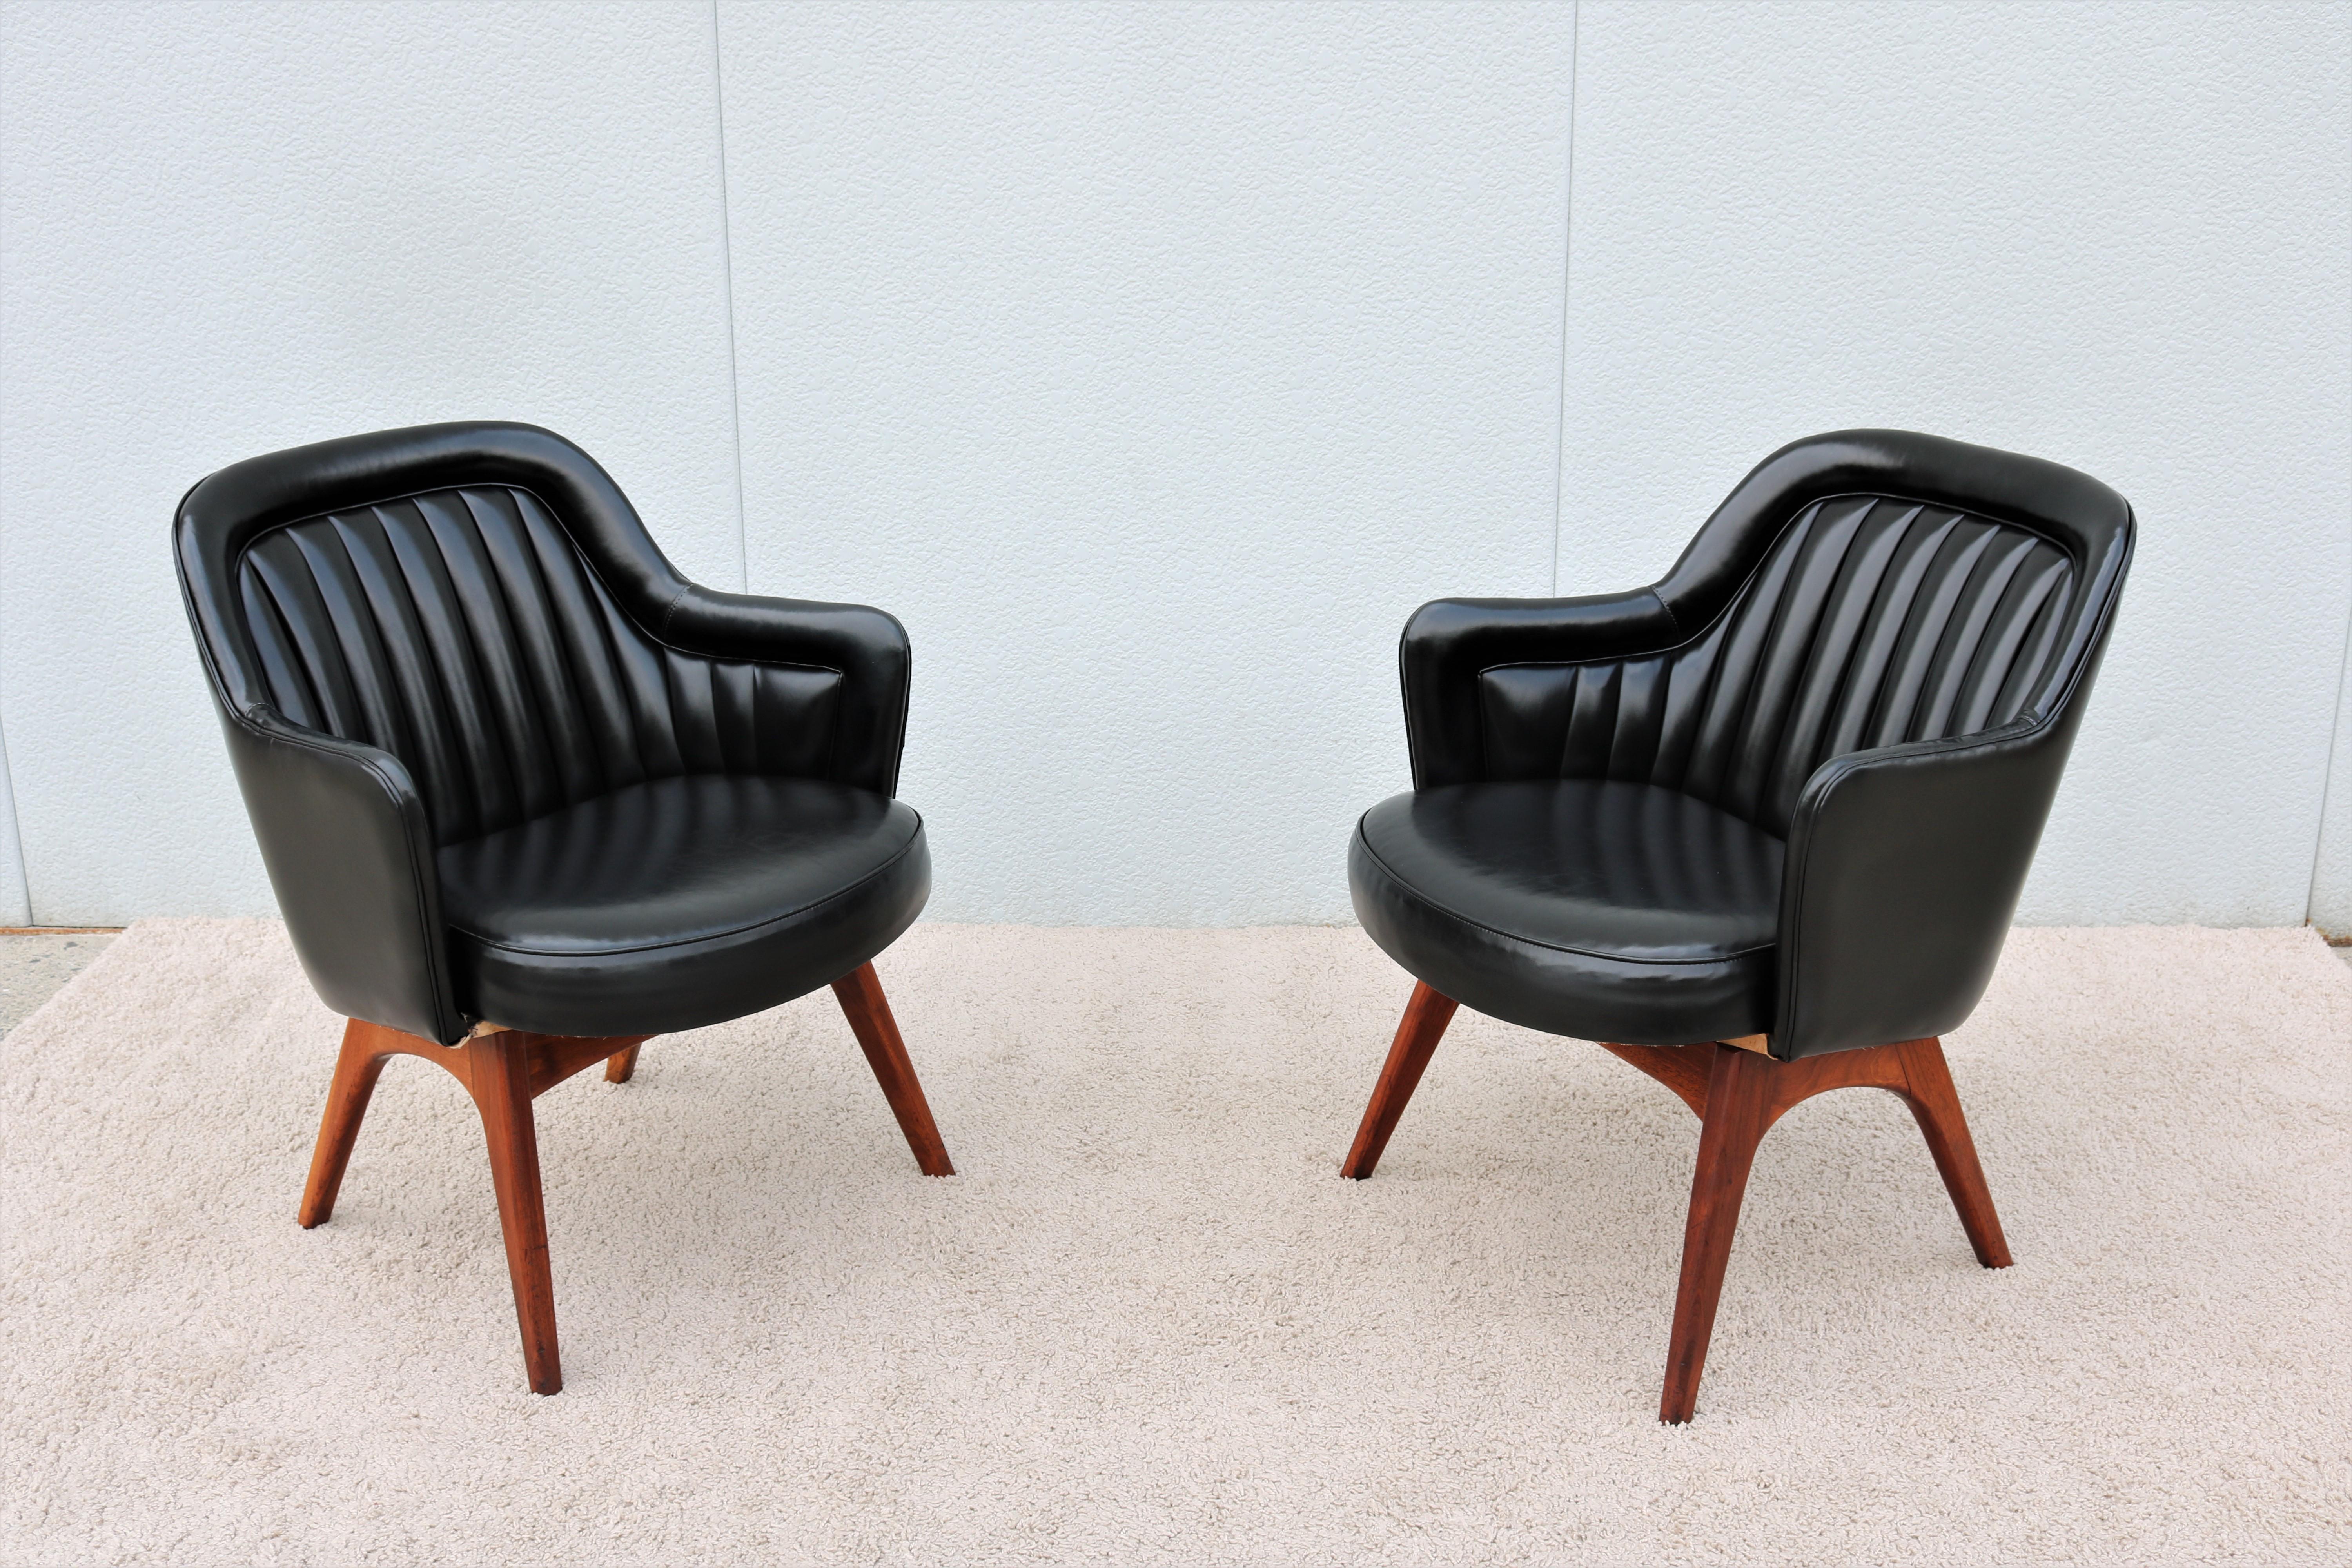 Fabulous Vintage Mid-Century Modern pair of Black Naugahyde and Walnut base Executive Armchairs, in the style of Eero Saarinen and Ward Bennett,

Classic and very comfortable design of Mid-Century modern make these chairs an impressive addition to